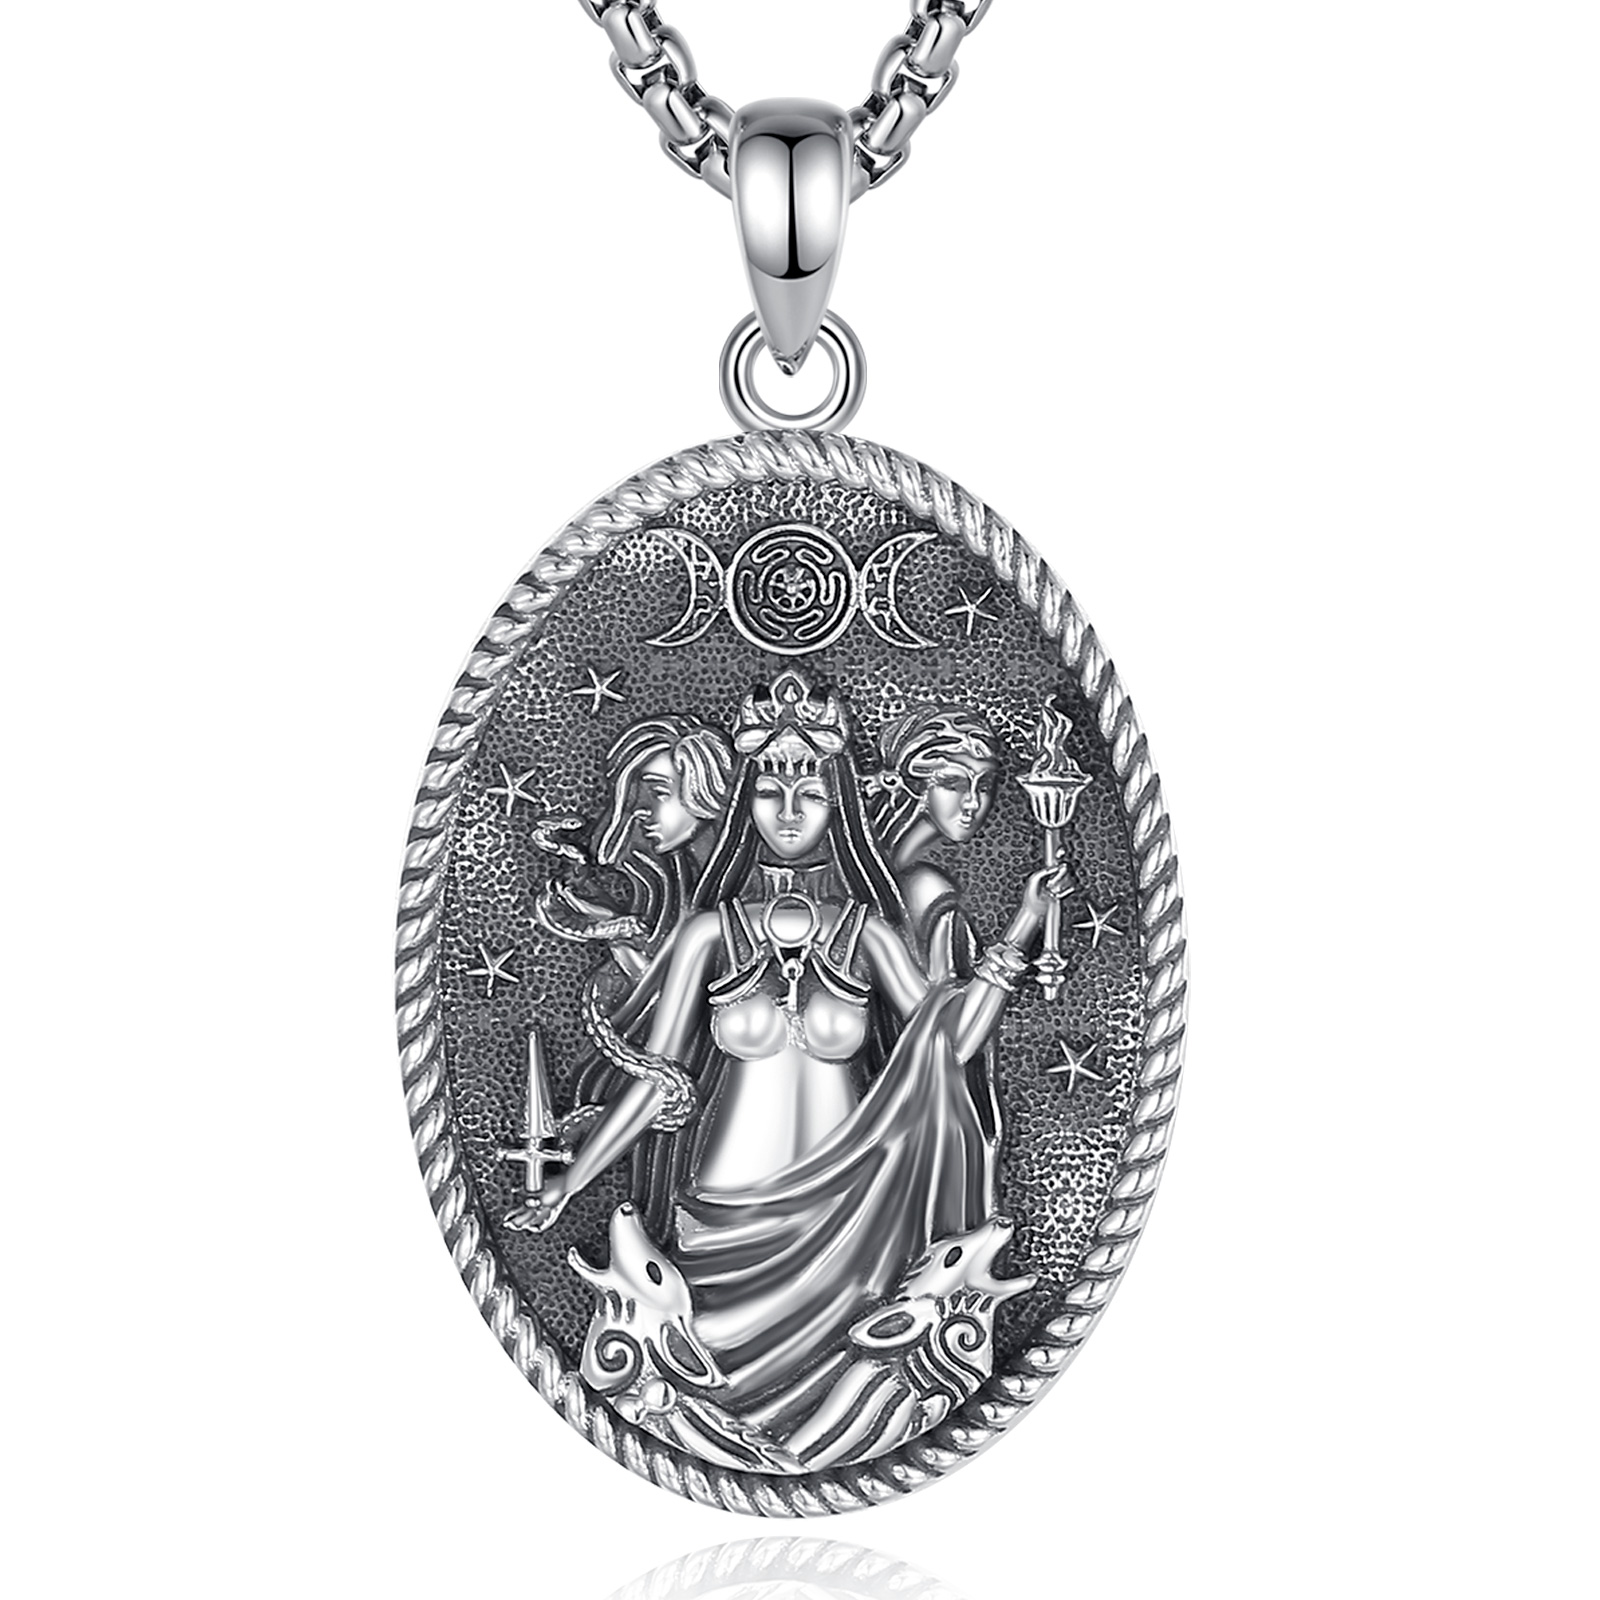 Hecate Triple Moon Goddess 925 Sterling Silver Pendant Necklace by Merryshine Jewelry